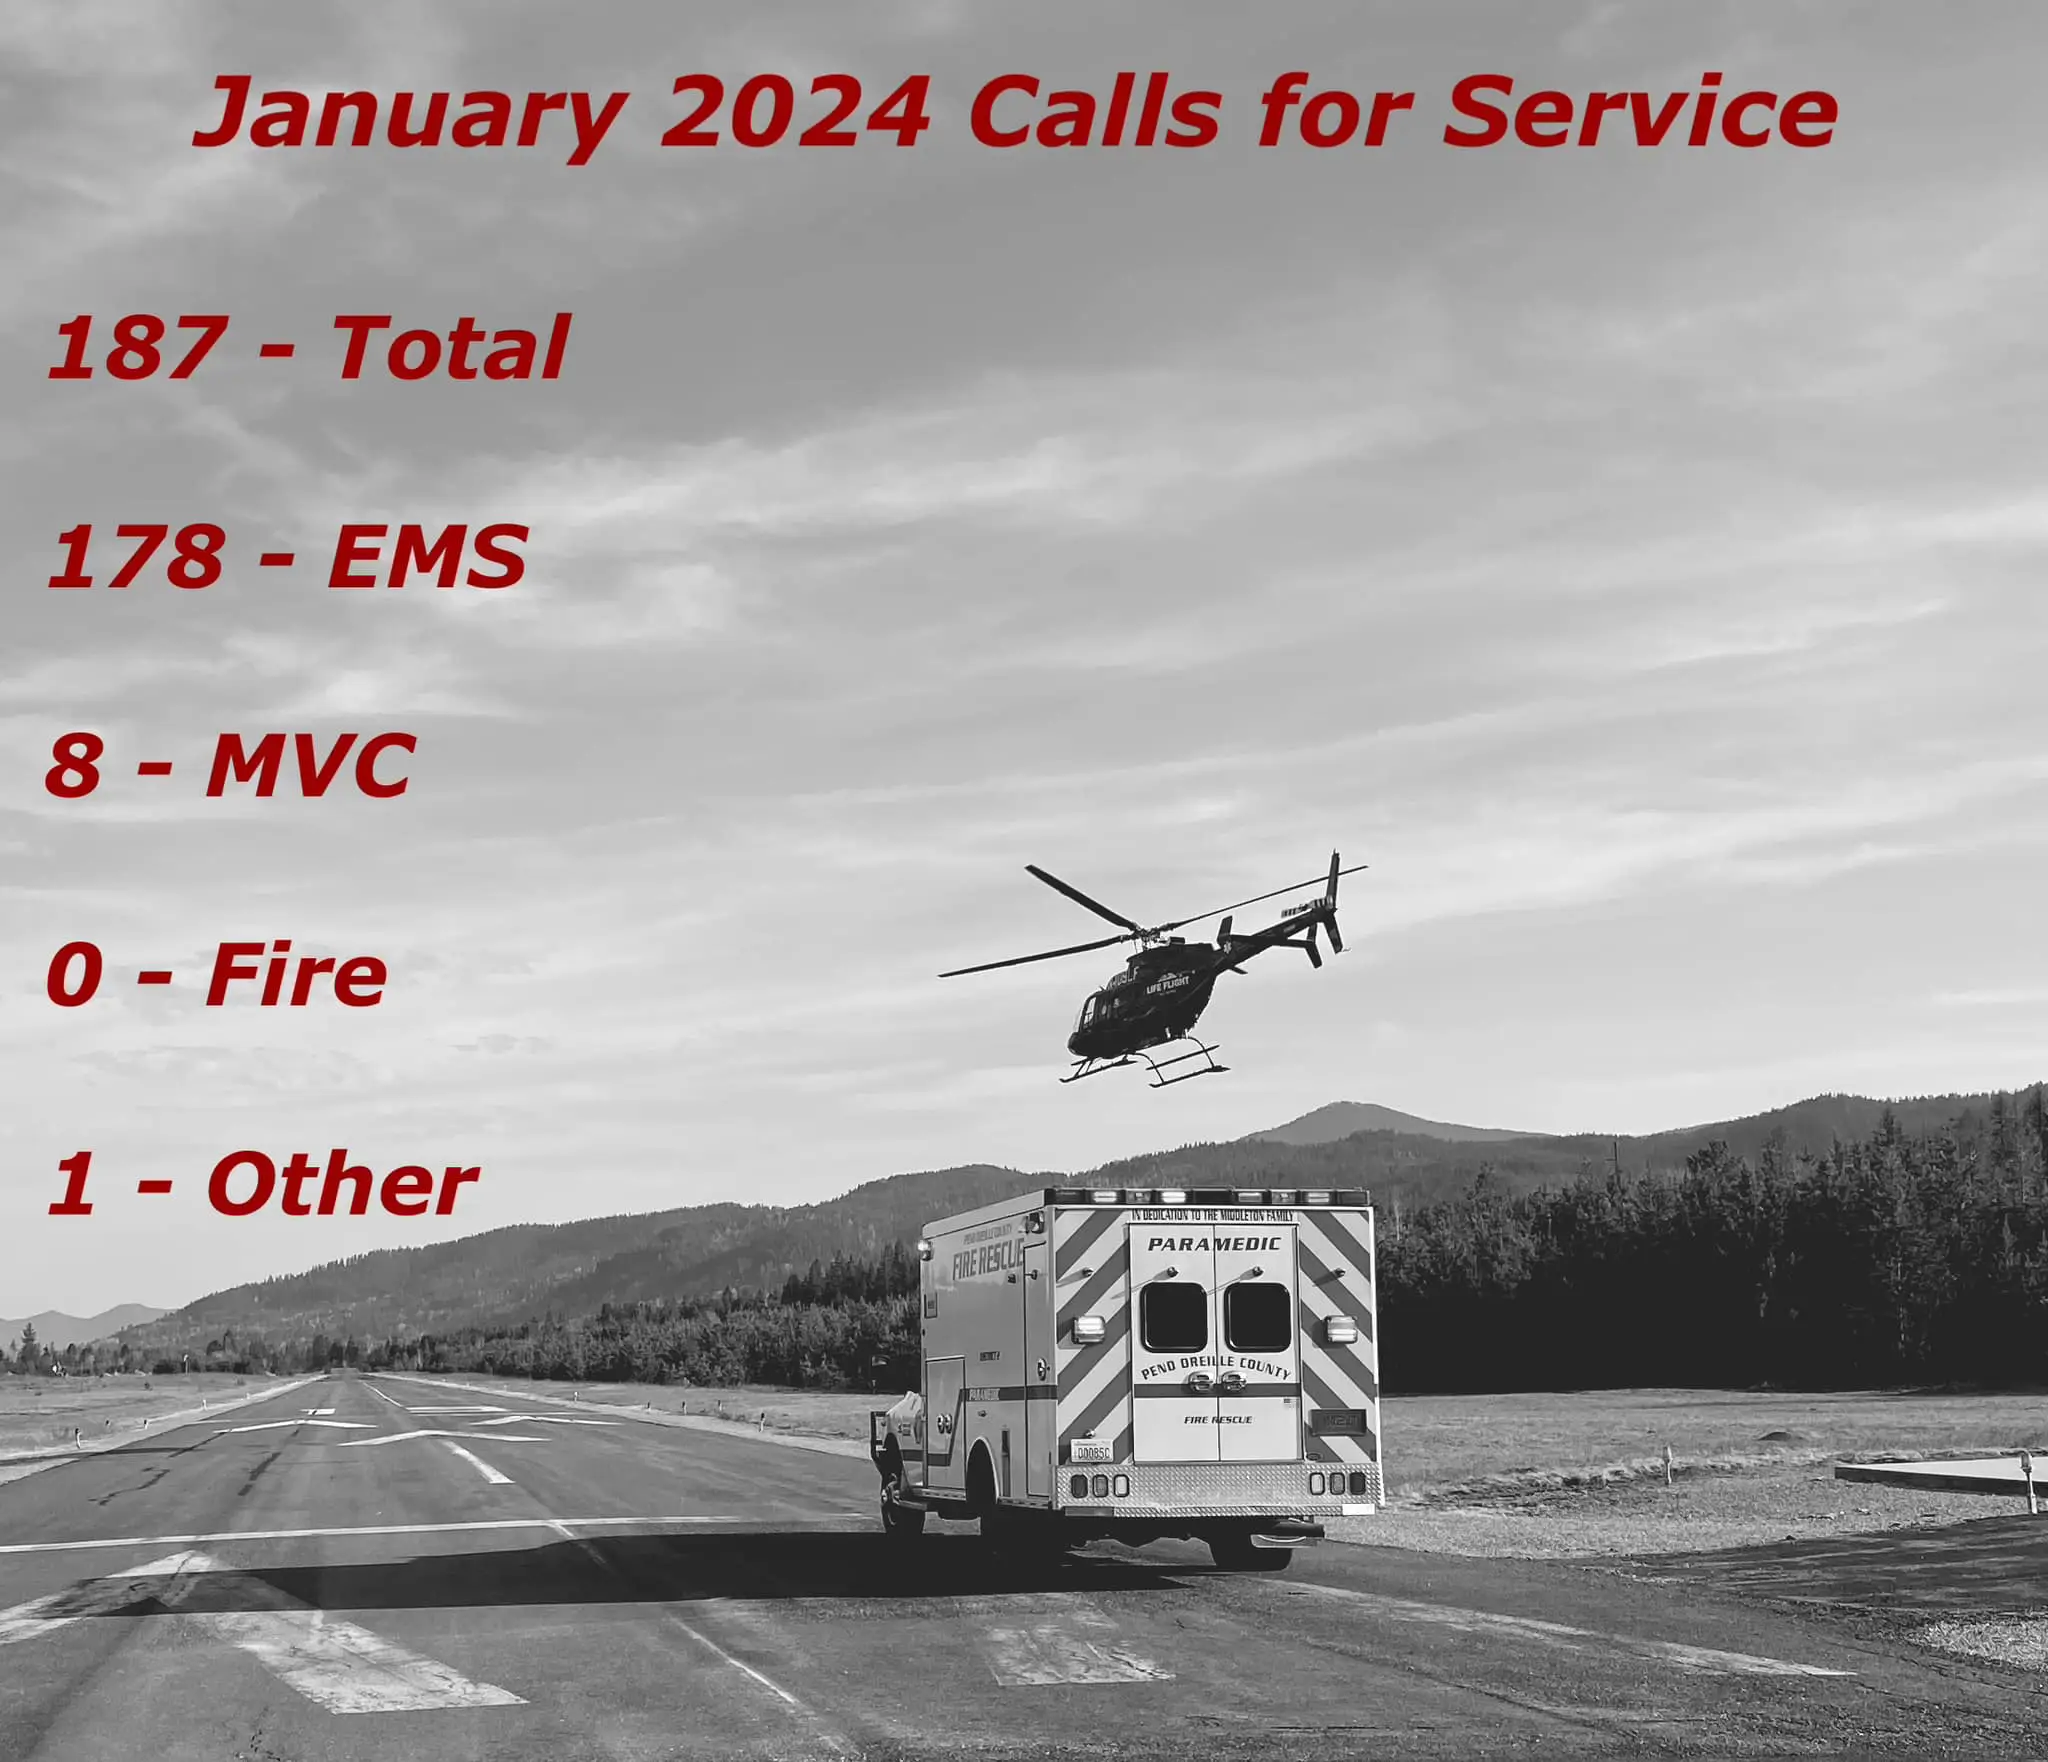 187 calls for service in January 2024